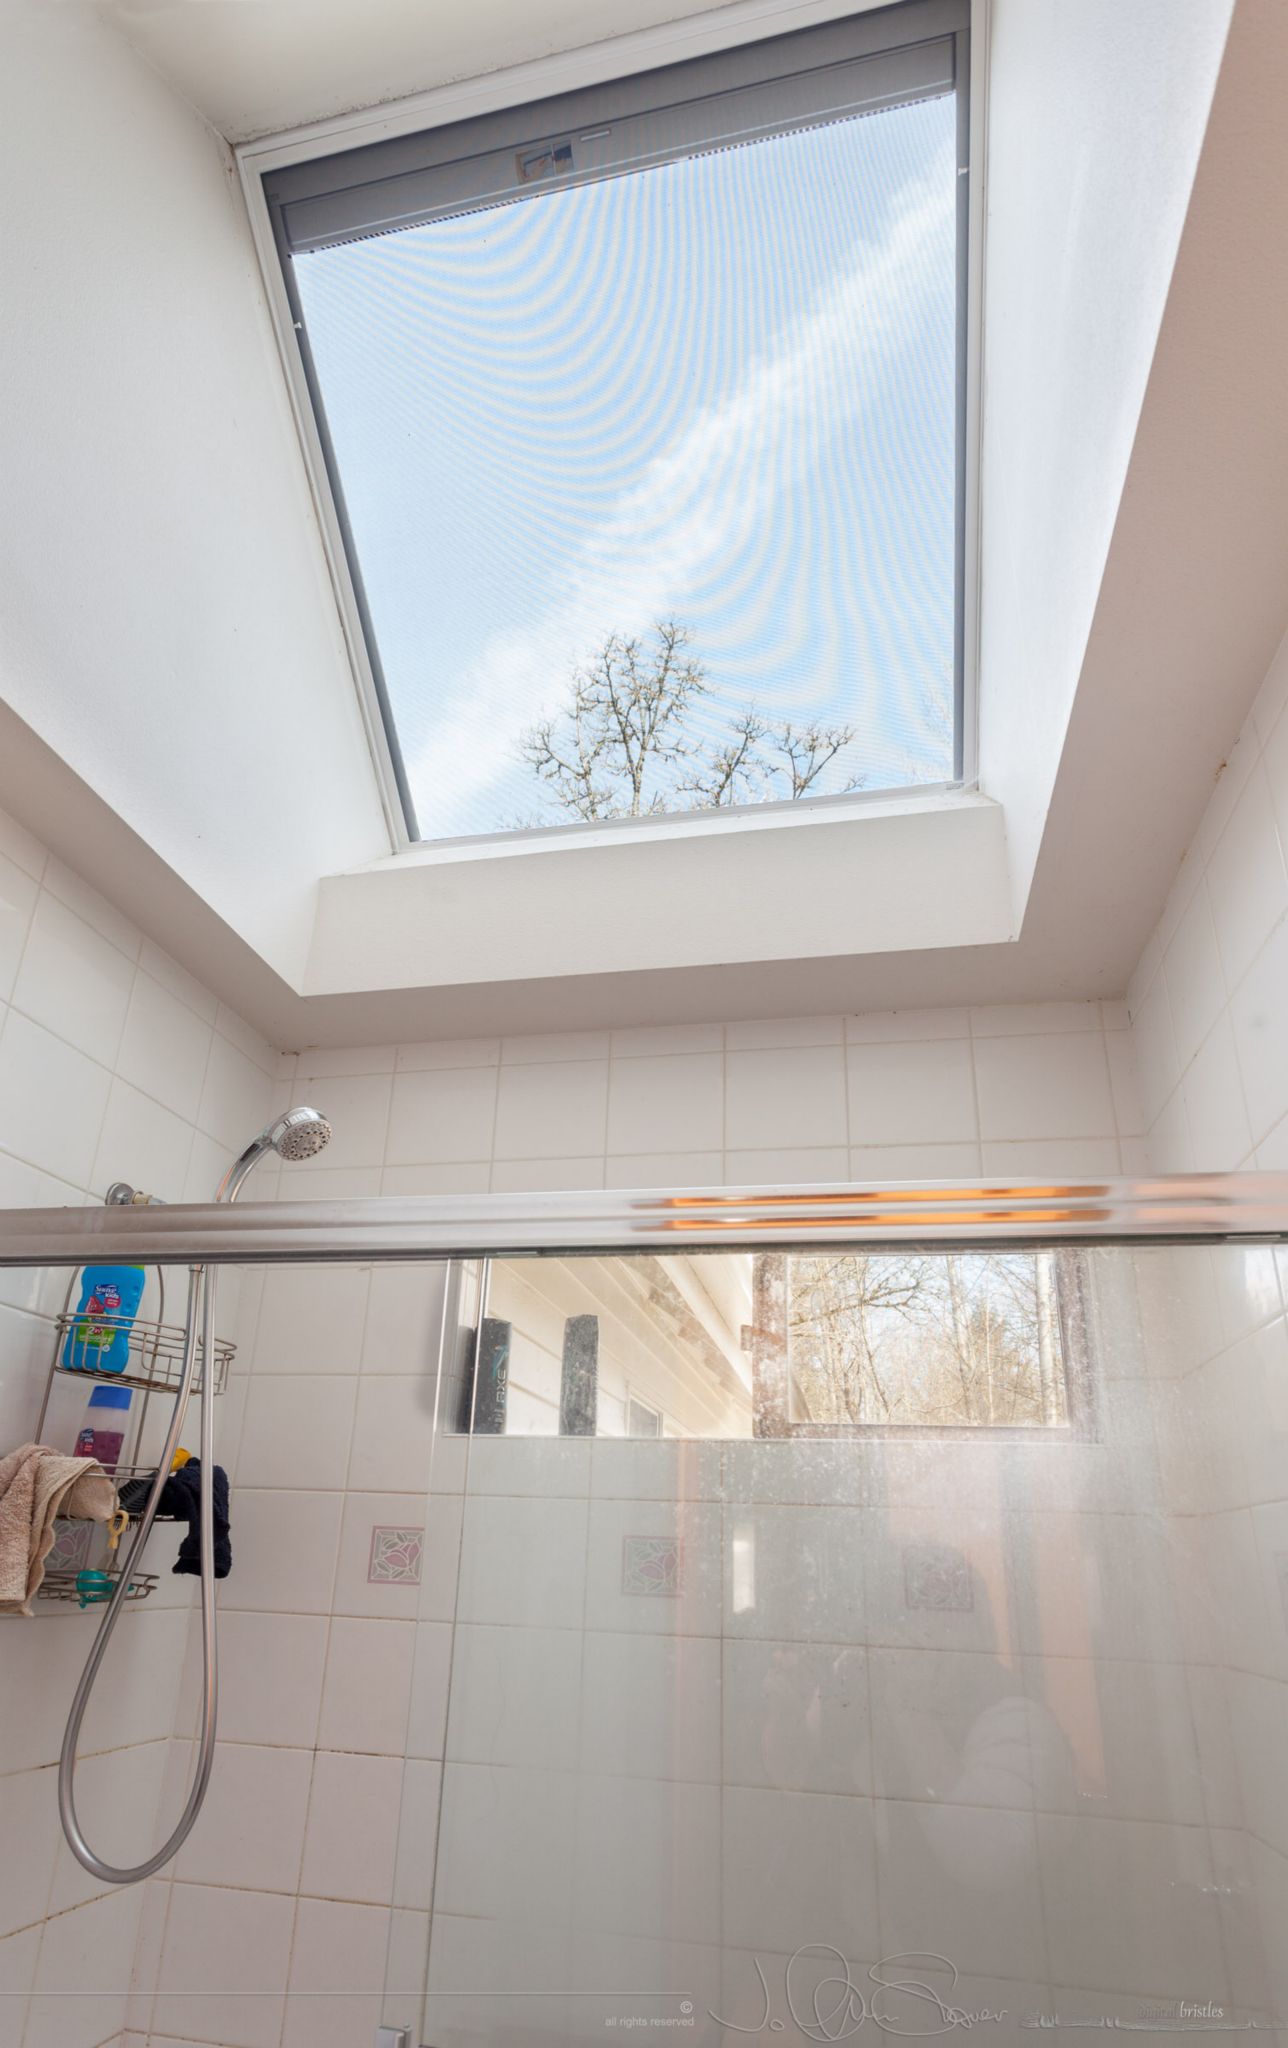 Skylight is the solar opening one we added during re-roofing in 2014